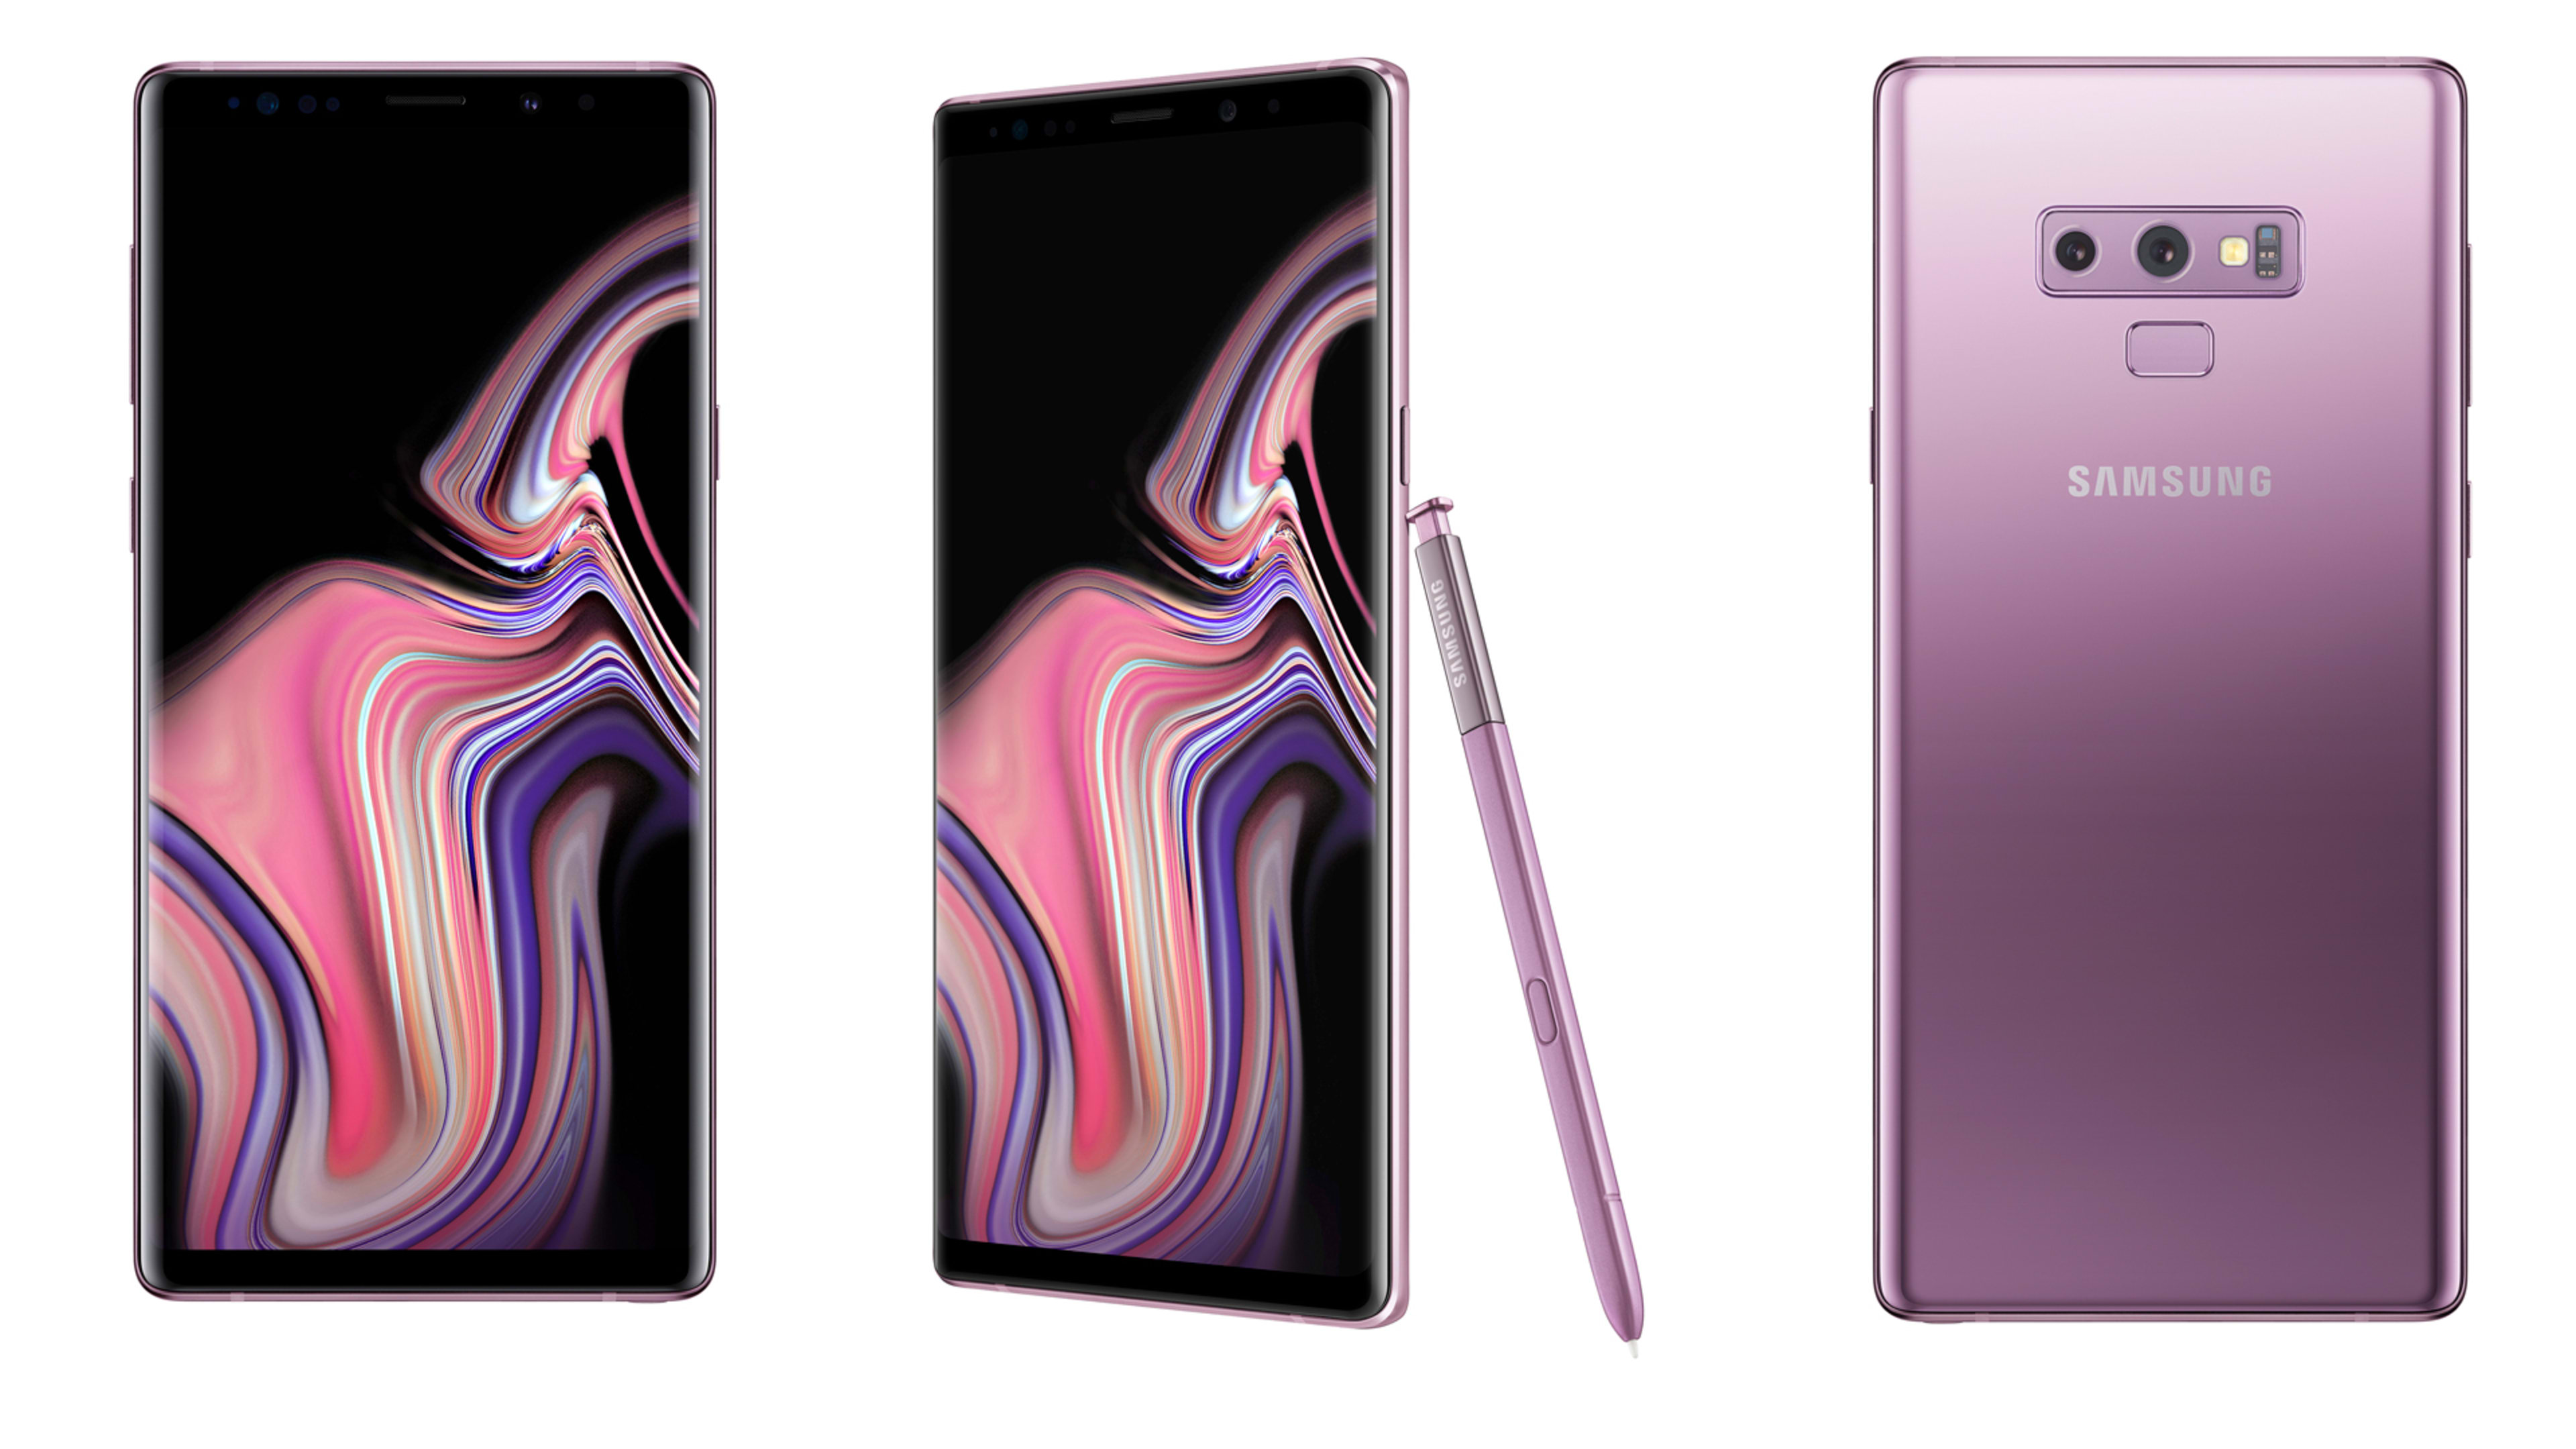 With Samsung’s new Galaxy Note9, the pen is mightier than ever